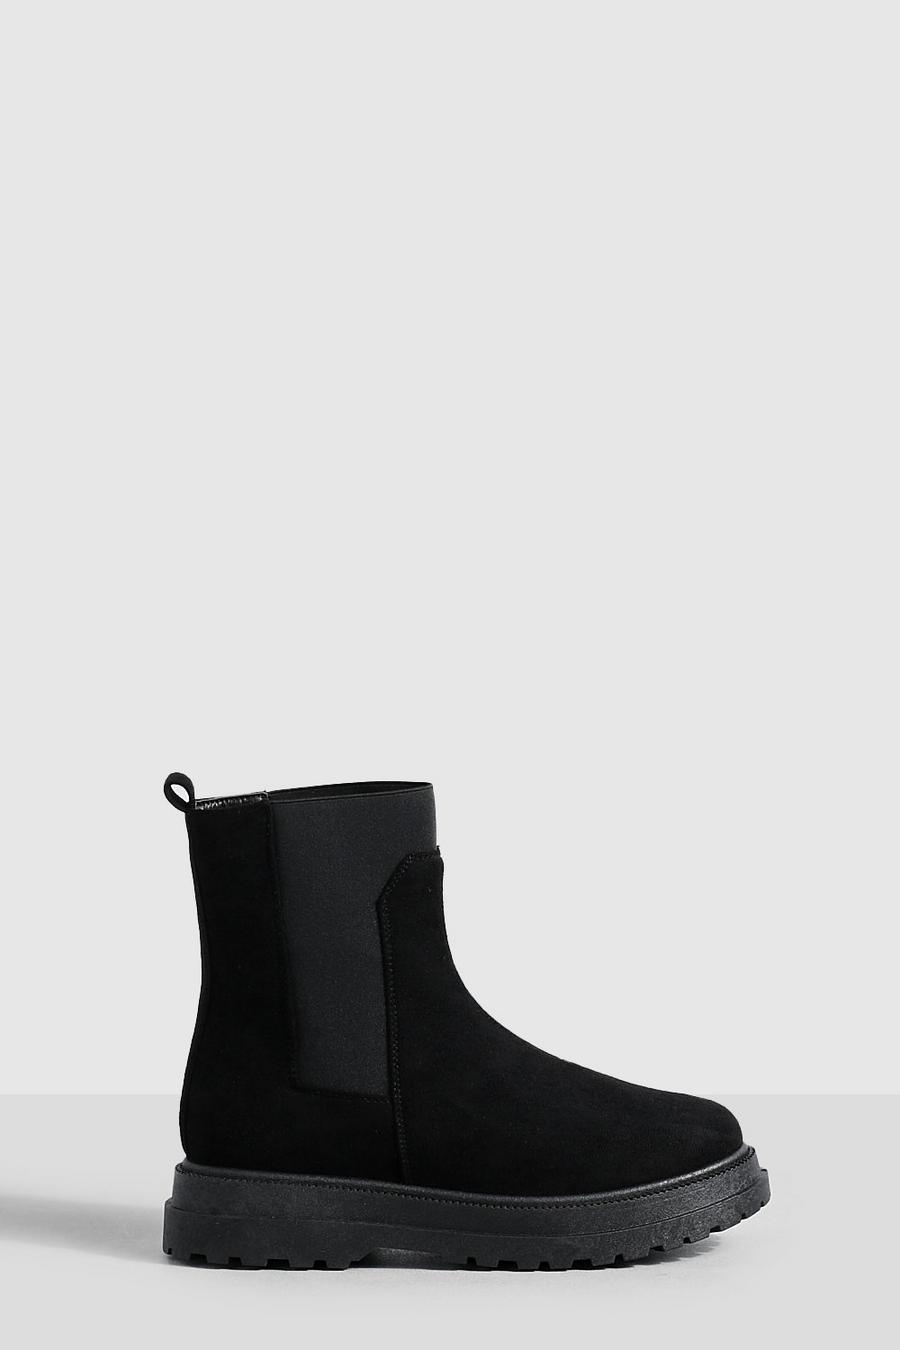 Black noir Wide Fit Tab Detail Double Sole Chunky Chelsea Boots